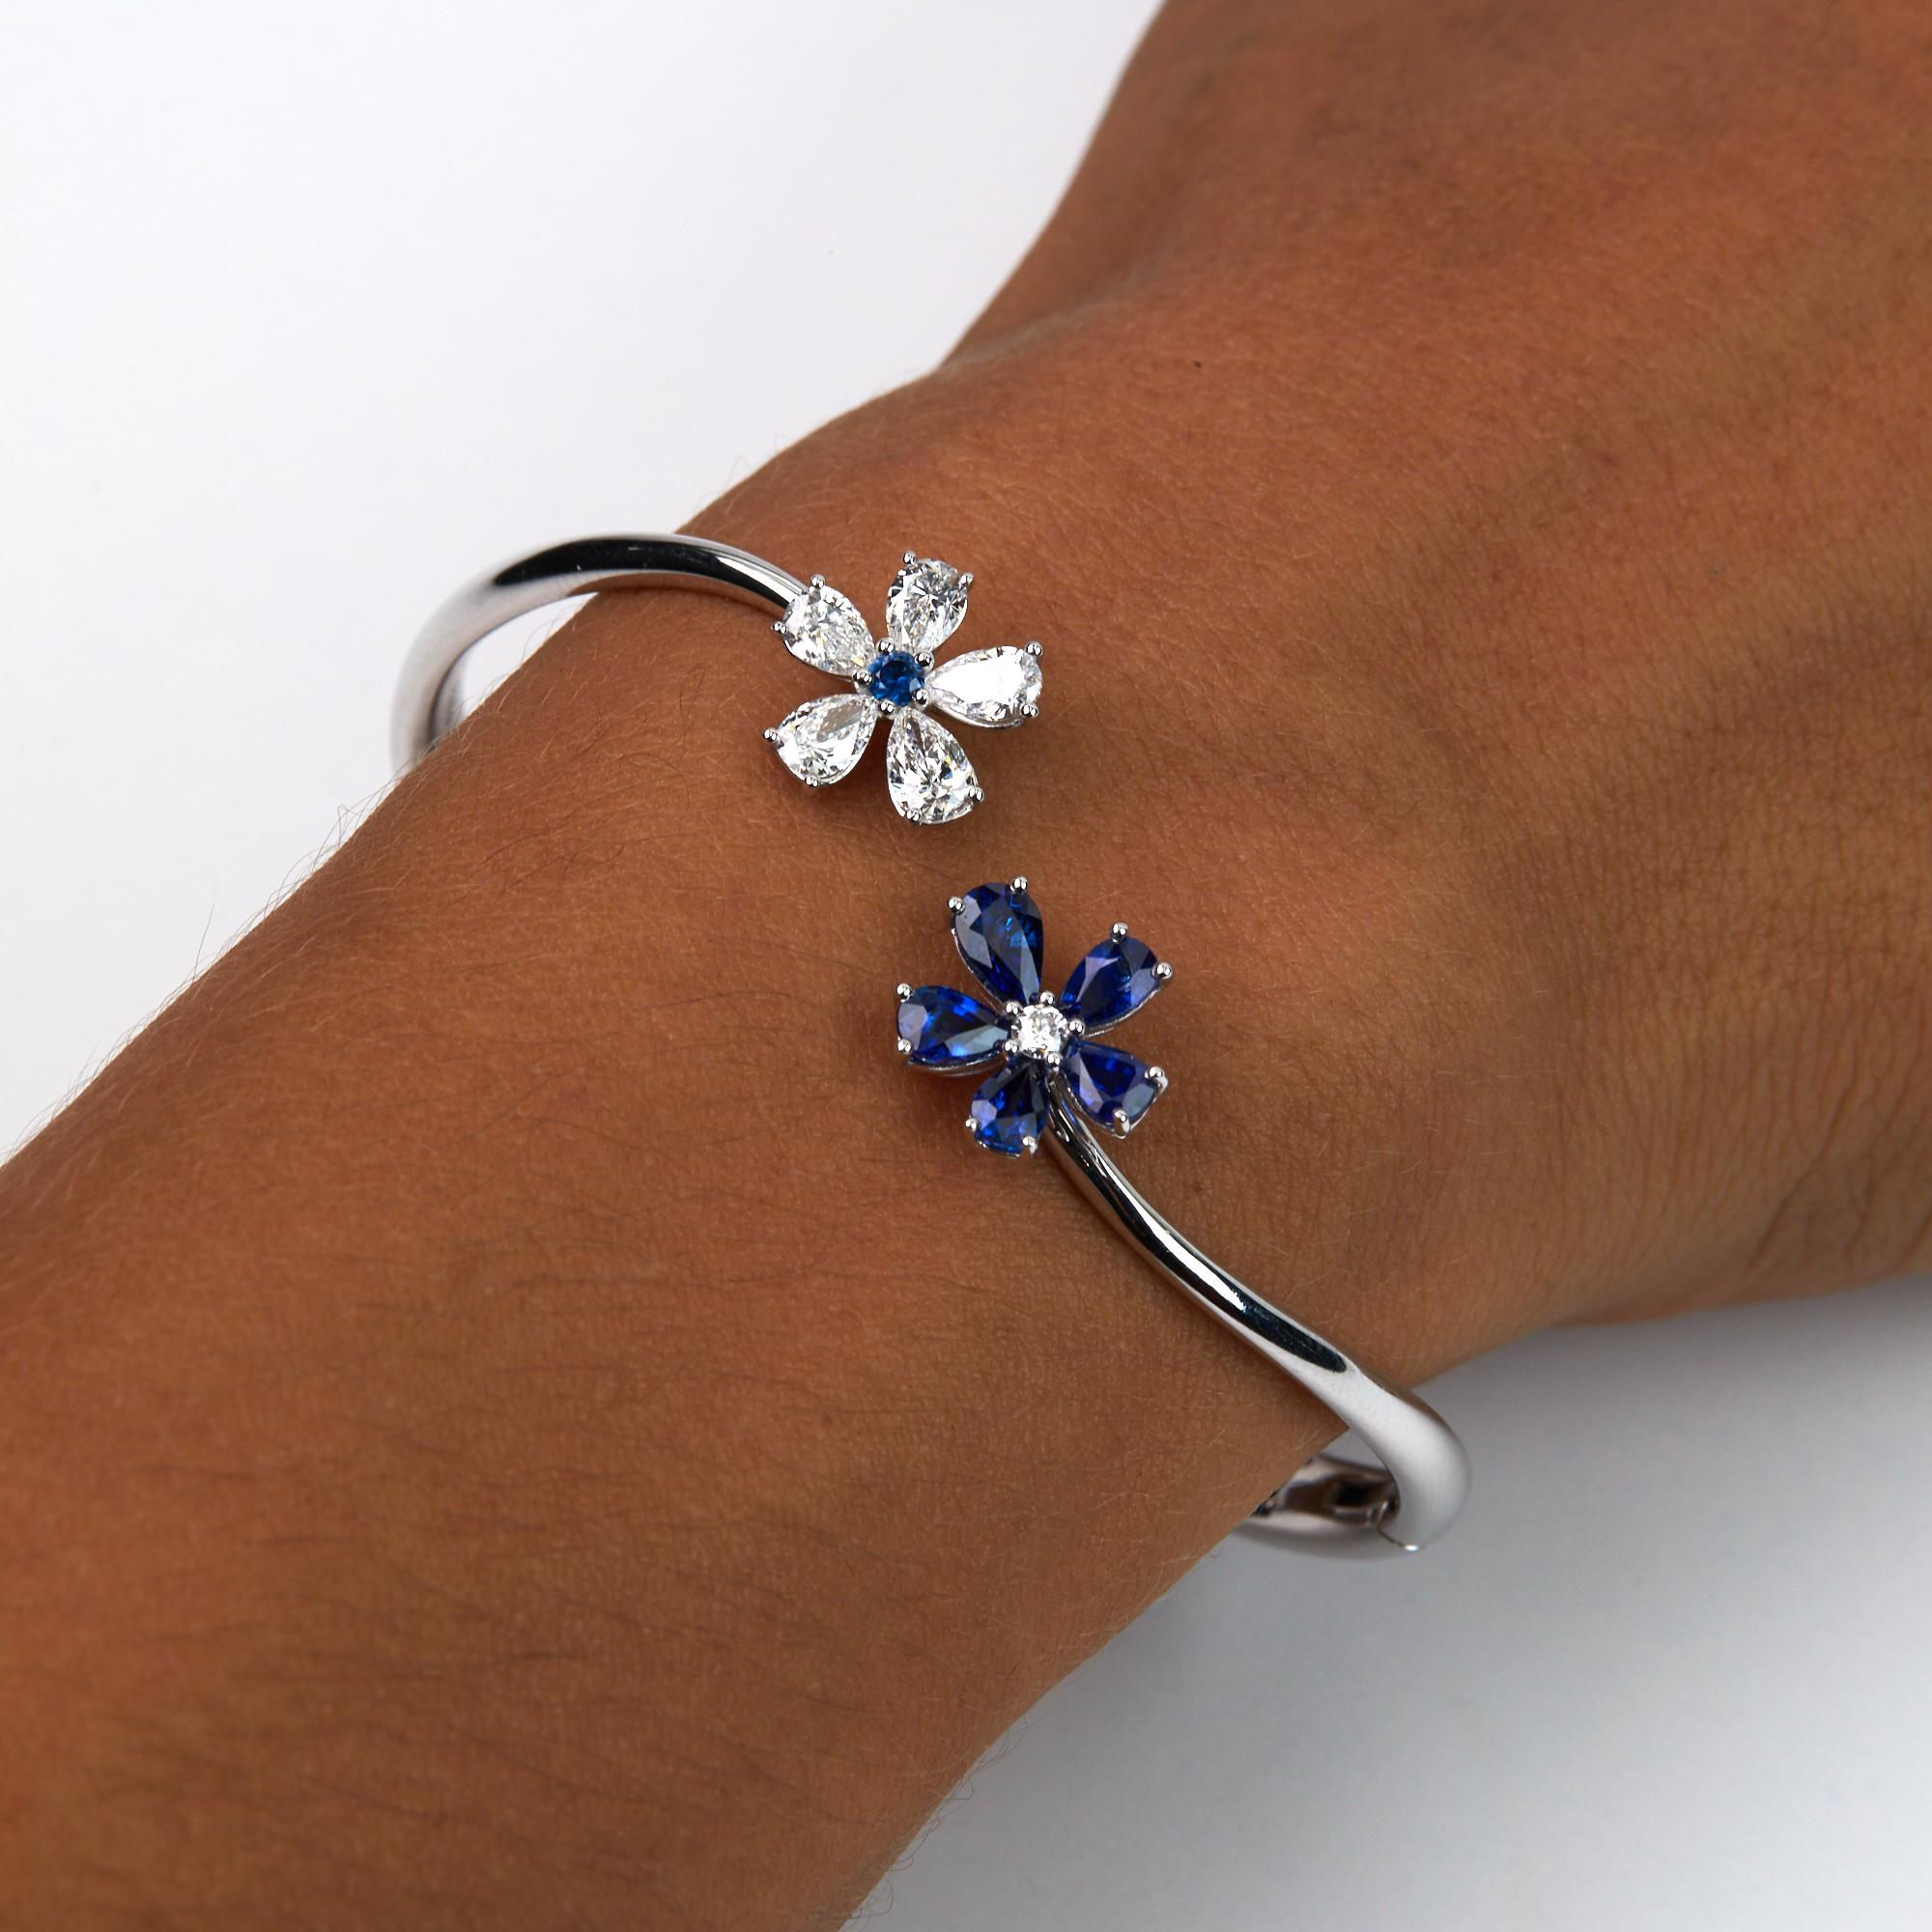 Blue Sapphire and Diamond Bangle Bracelet in a beautiful flora design.  The alternating Pear shaped Diamonds and Sapphires make up the petals of this modern bracelet from Italy. The Brilliant round cut sapphires and diamonds alternating make up the